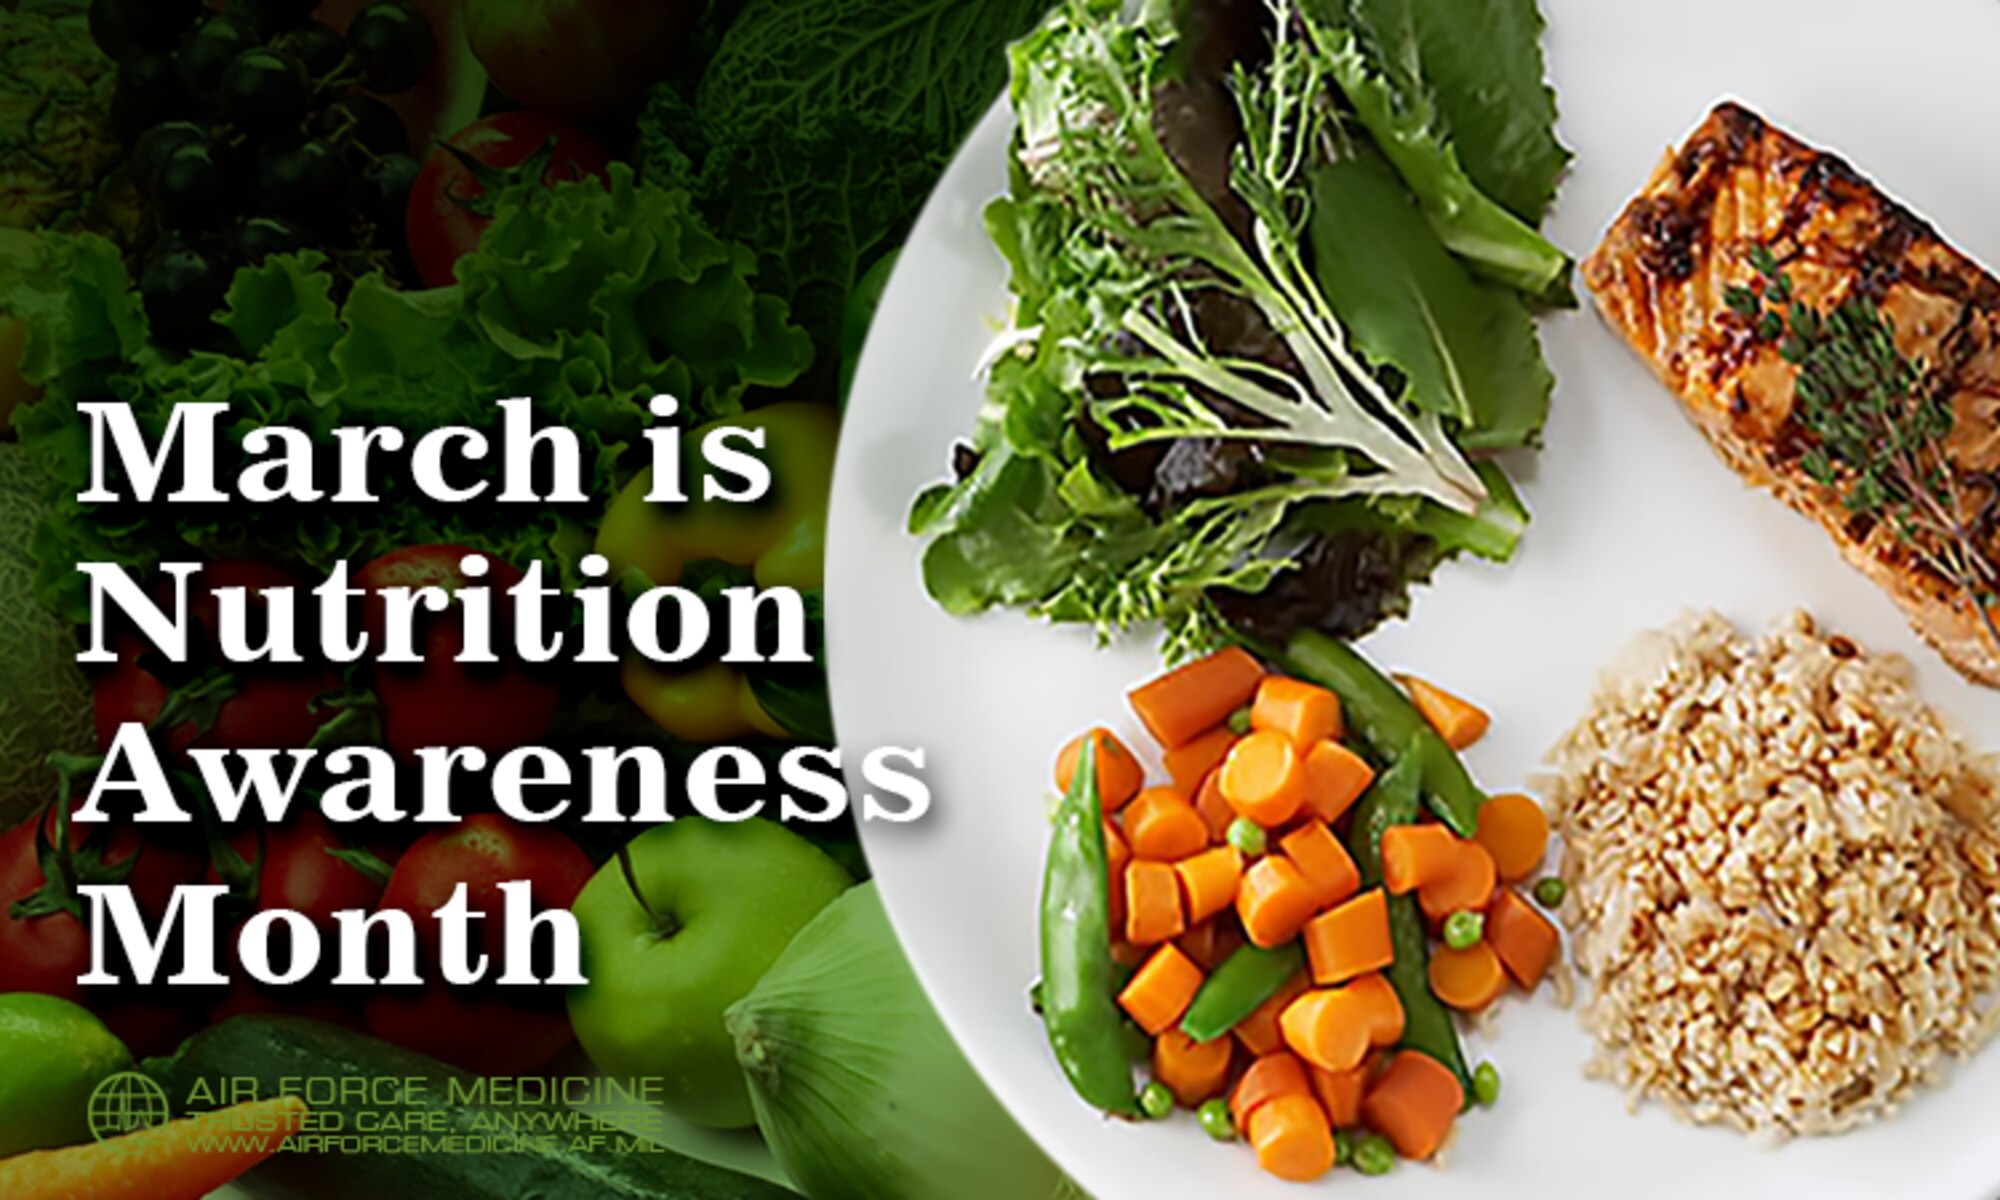 March is National Nutrition Month, an awareness program focusing on the importance of informed food choices and developing good eating and physical activity habits.